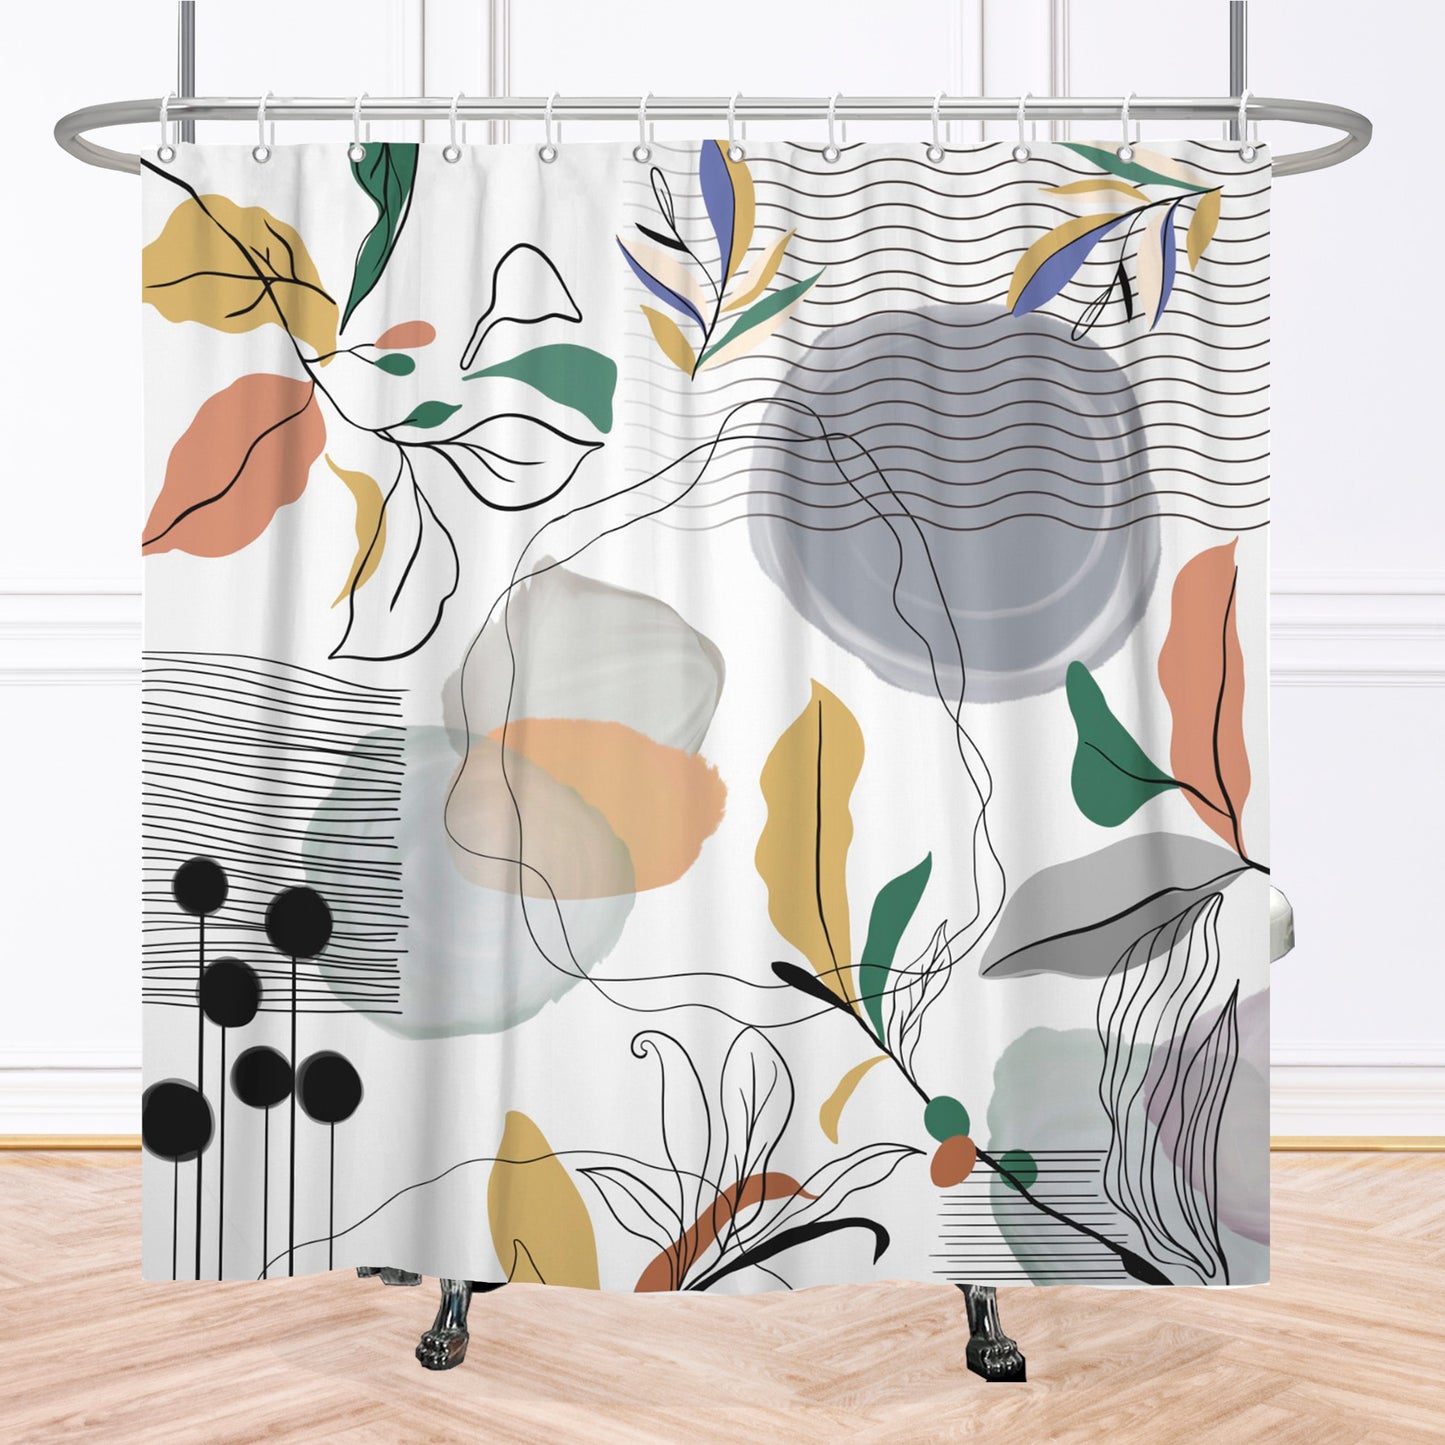 maoma art shower curtain bathroom. white and floral abstract. cortinas de baño